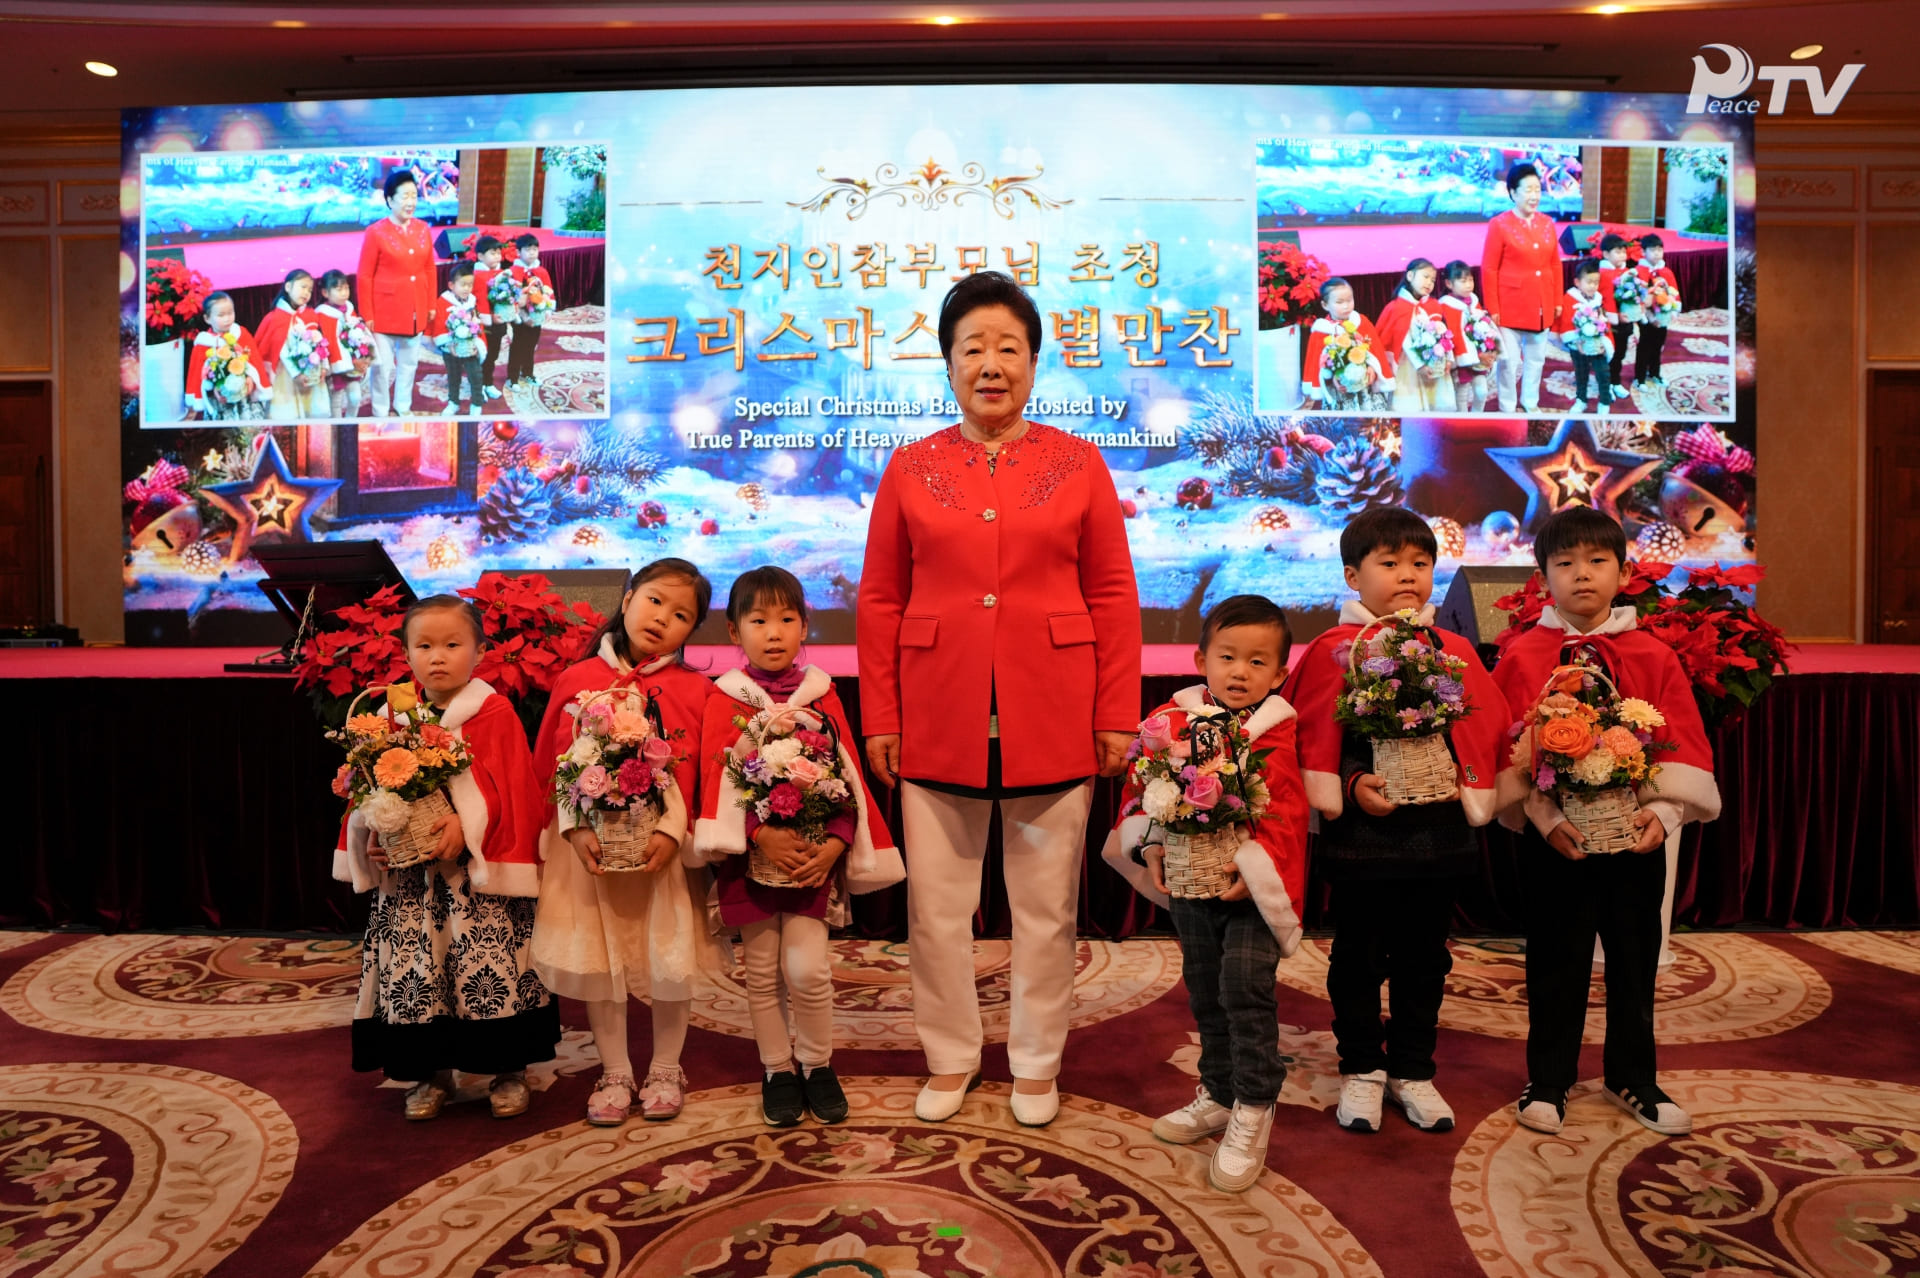 Special Christmas Dinner with True Mother (December 24, 2022, Cheon Jeong Gung Banquet Room)